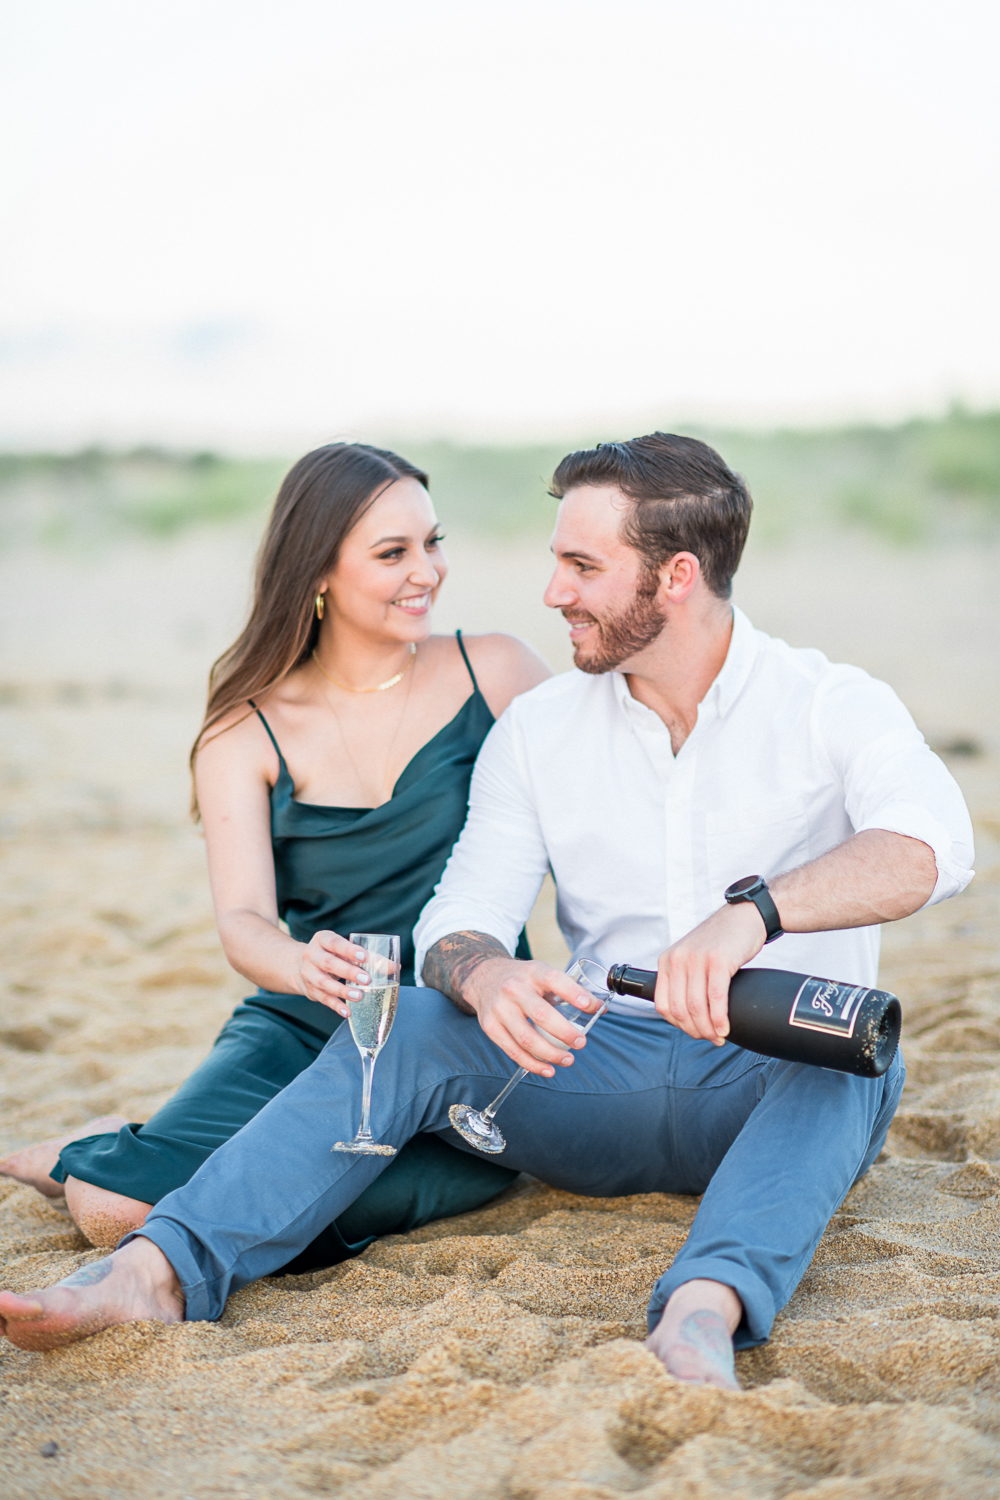 Elegant Sunset Engagement Session at the Virginia Beach Oceanfront - Hunter and Sarah Photography